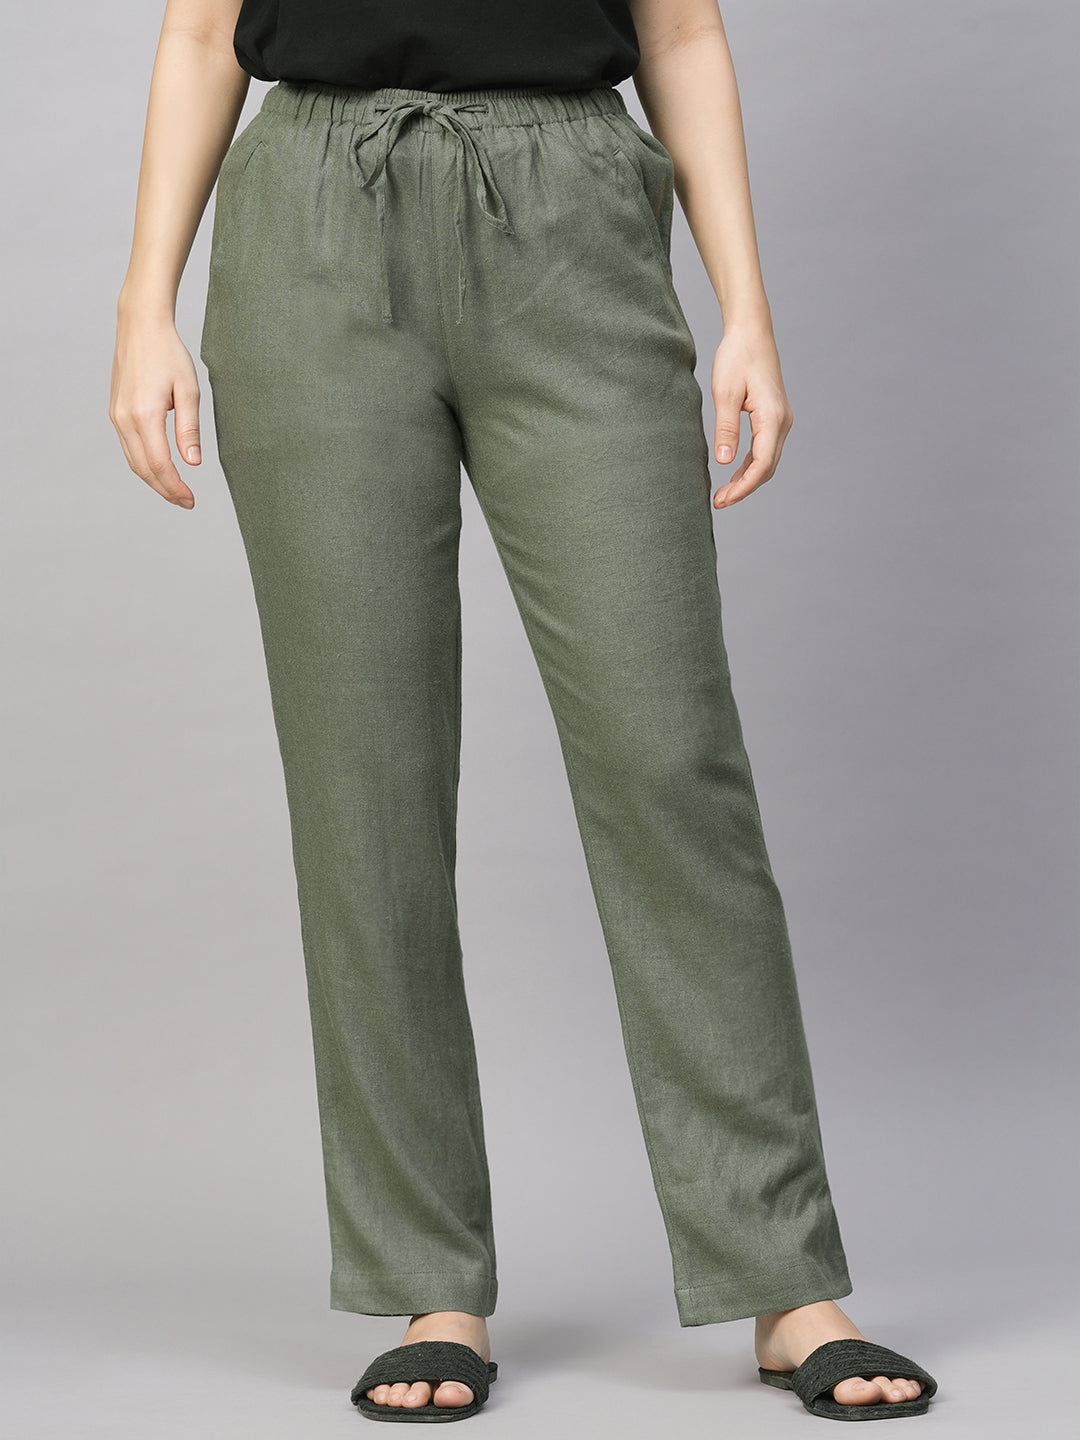 Trousers for Women: Buy Pants for Women Online in India